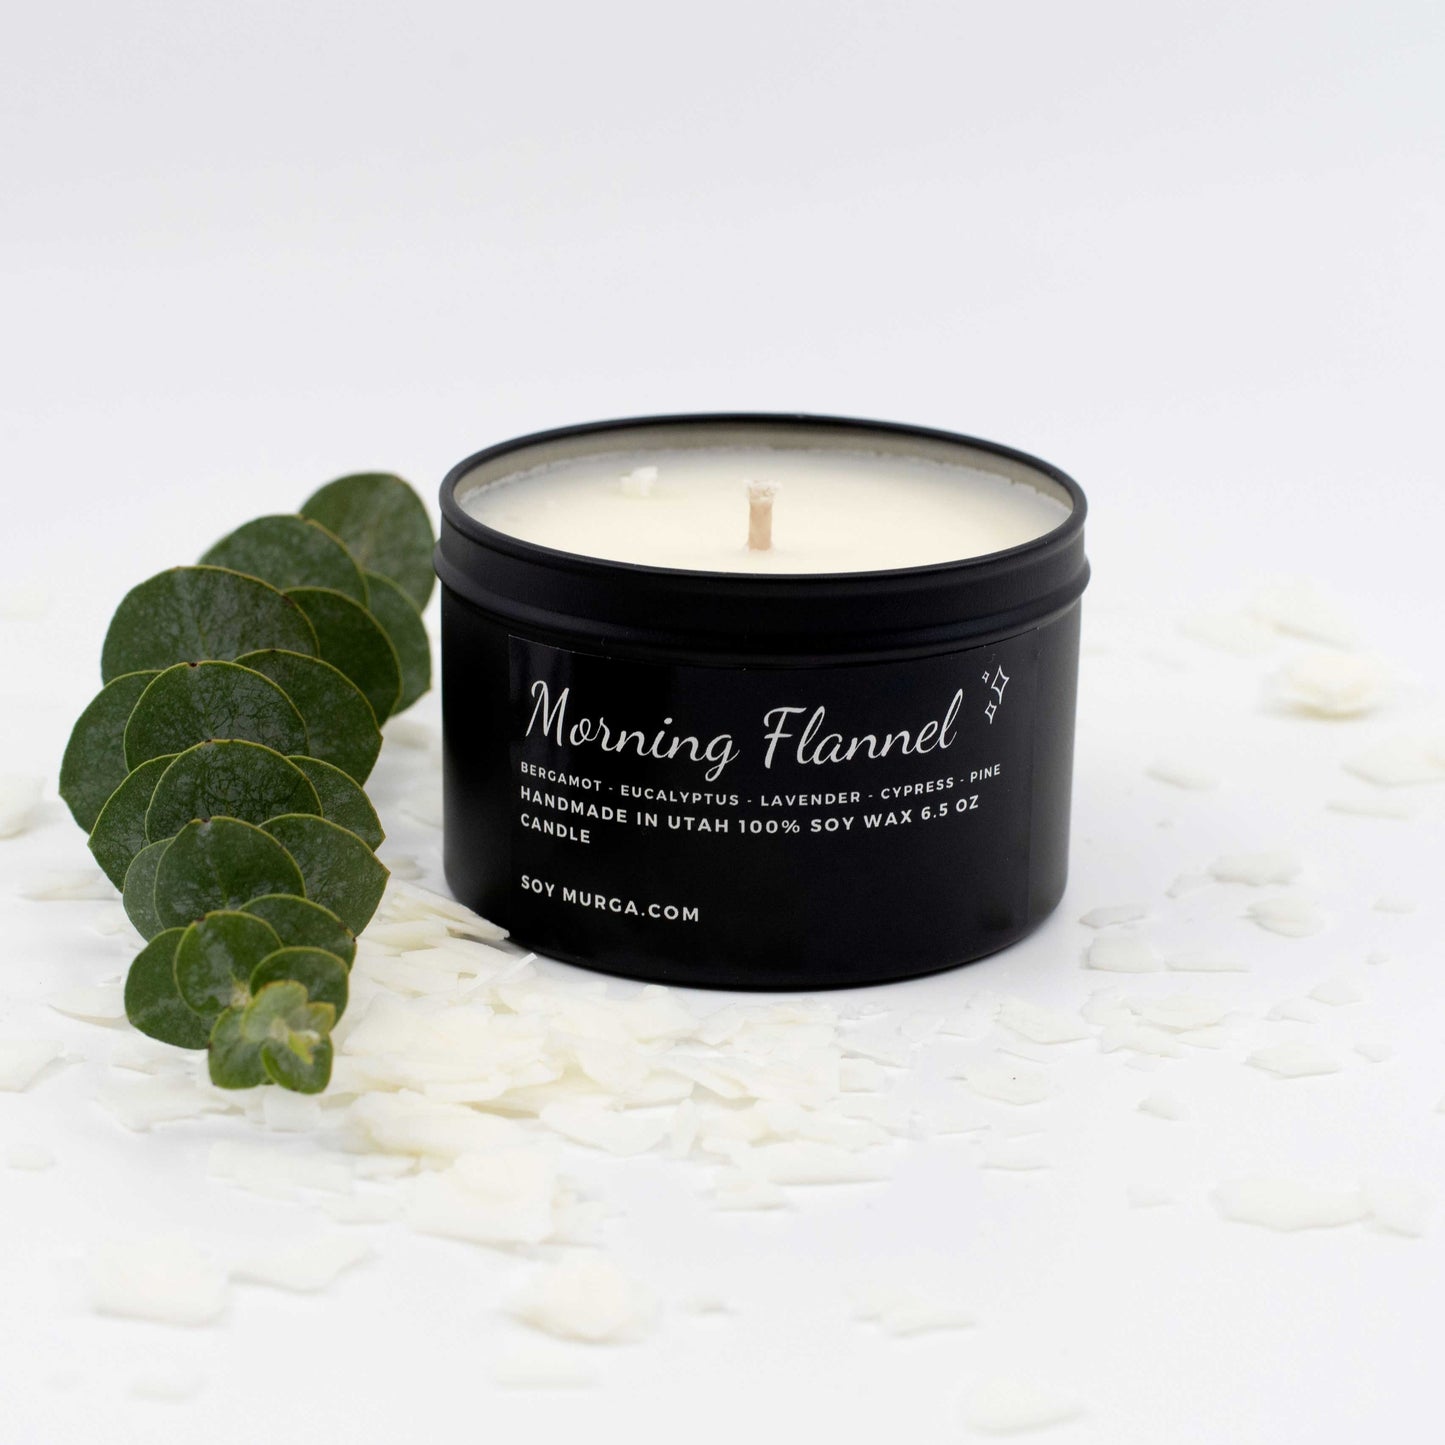 Morning Flannel Candle